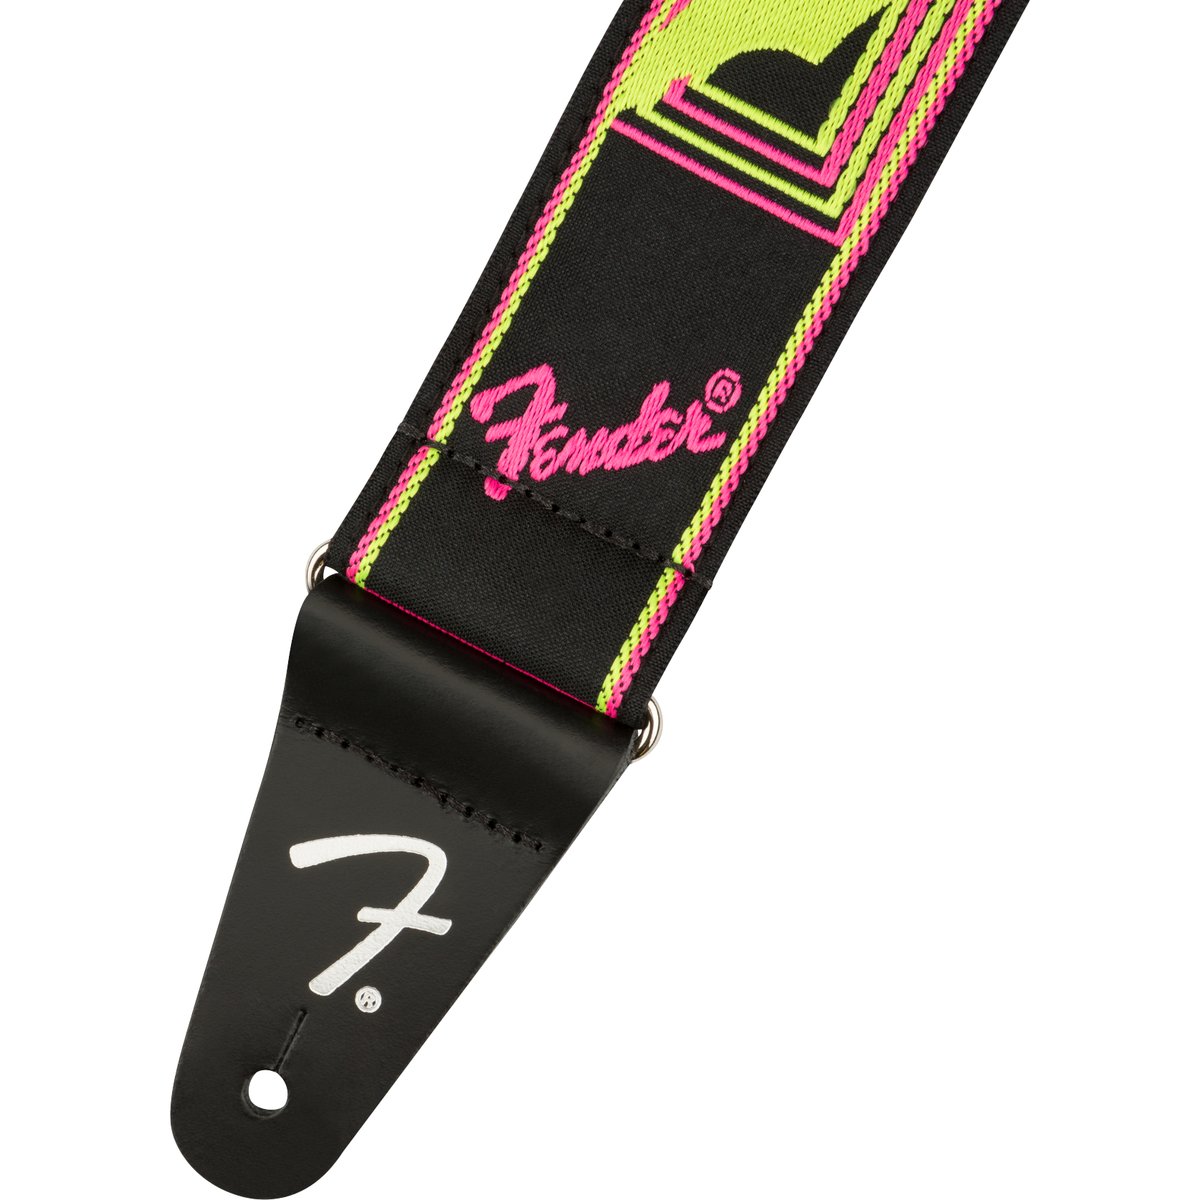 Fender Neon Monogrammed Strap Pink and Yellow 2in